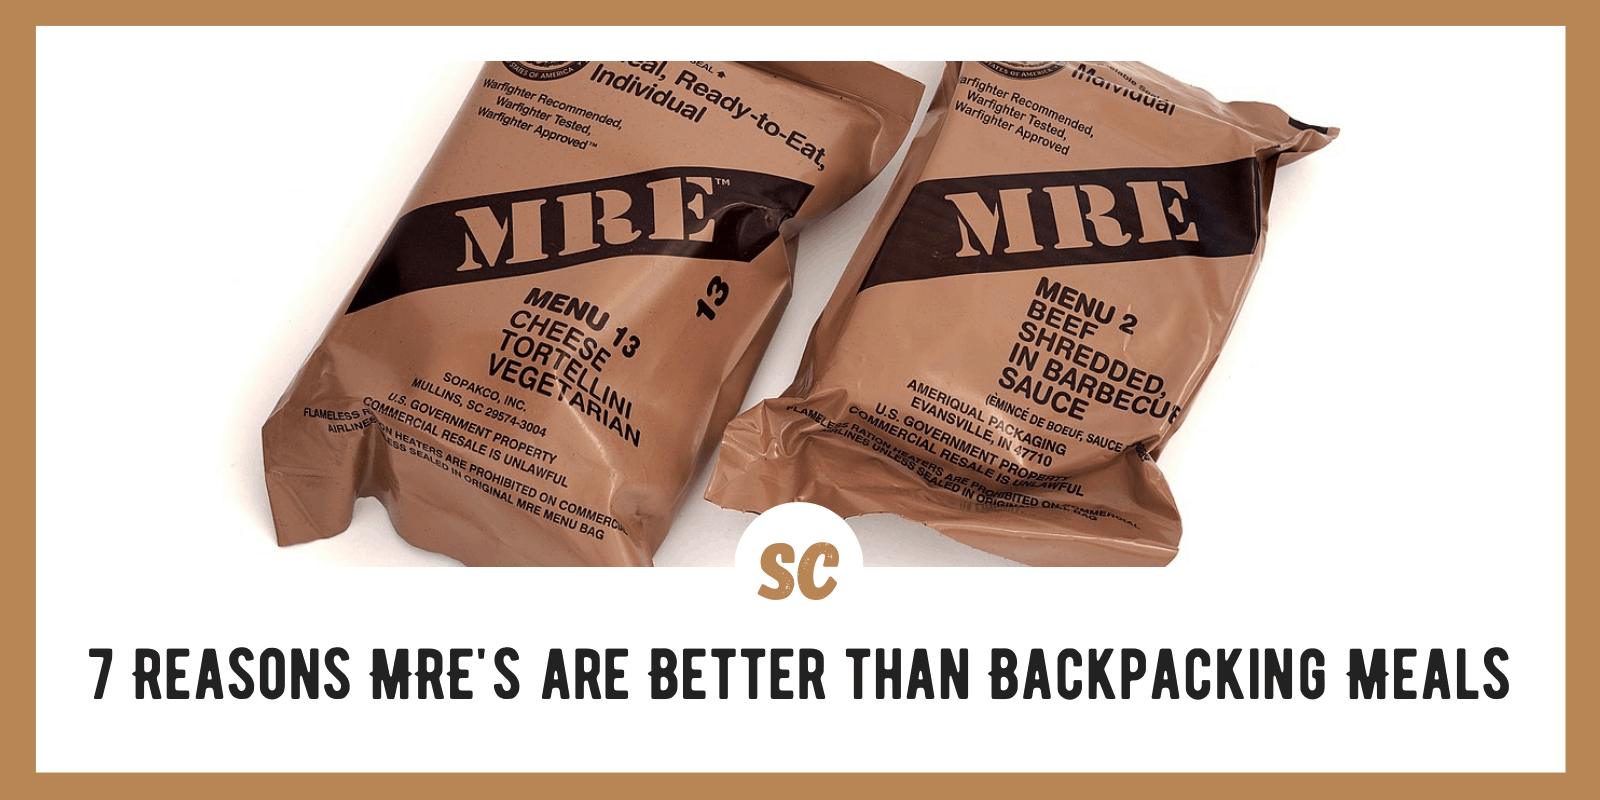 7 Reasons MRE’s are Better than Backpacking Meals